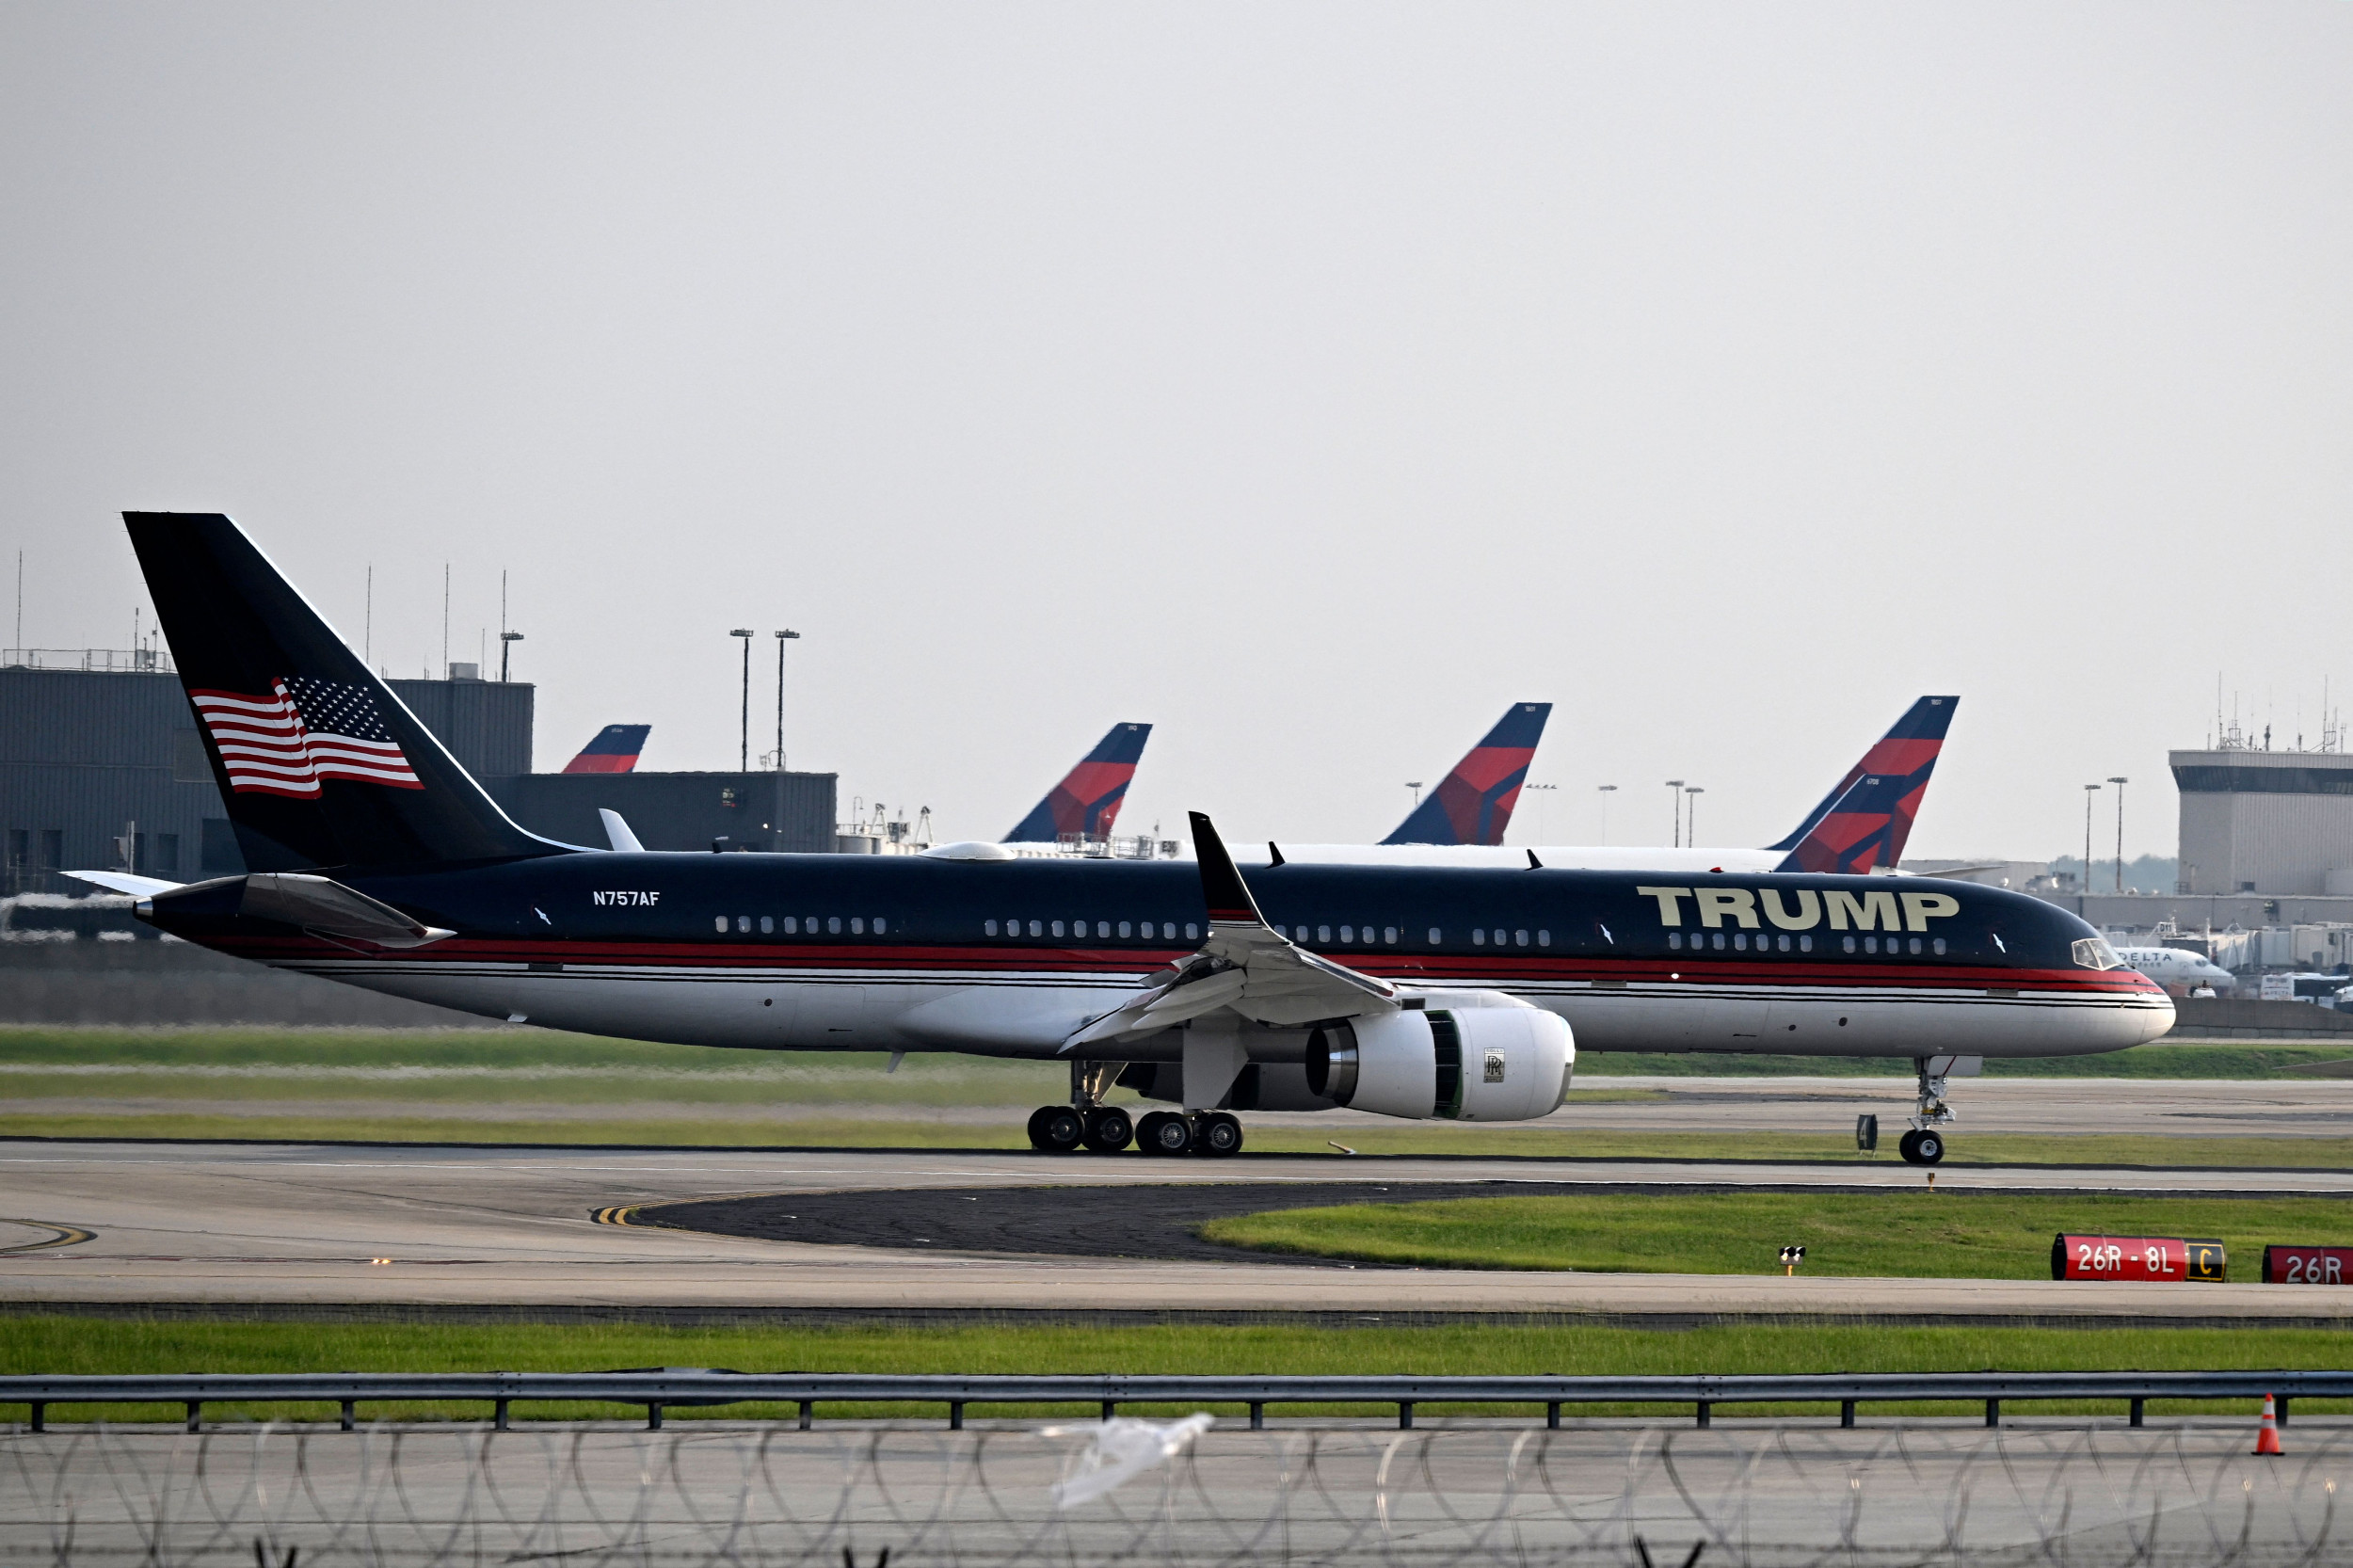 Donald Trump’s plane ‘grounded’, photo shows